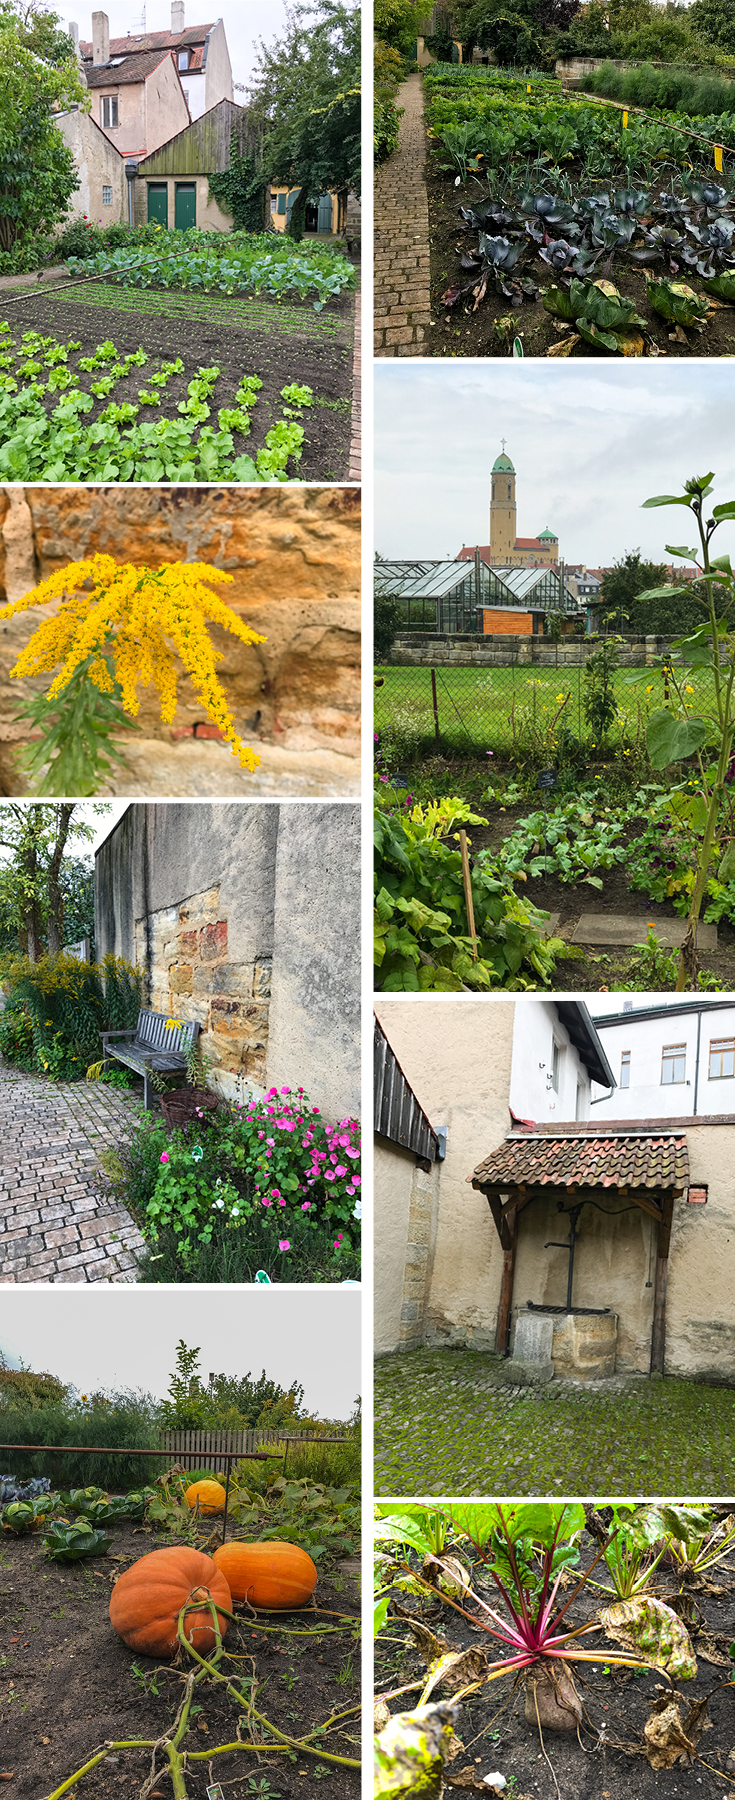 The Bamberg Heritage Garden, part of the Bamberg Gardeners' and Vintners' Museum